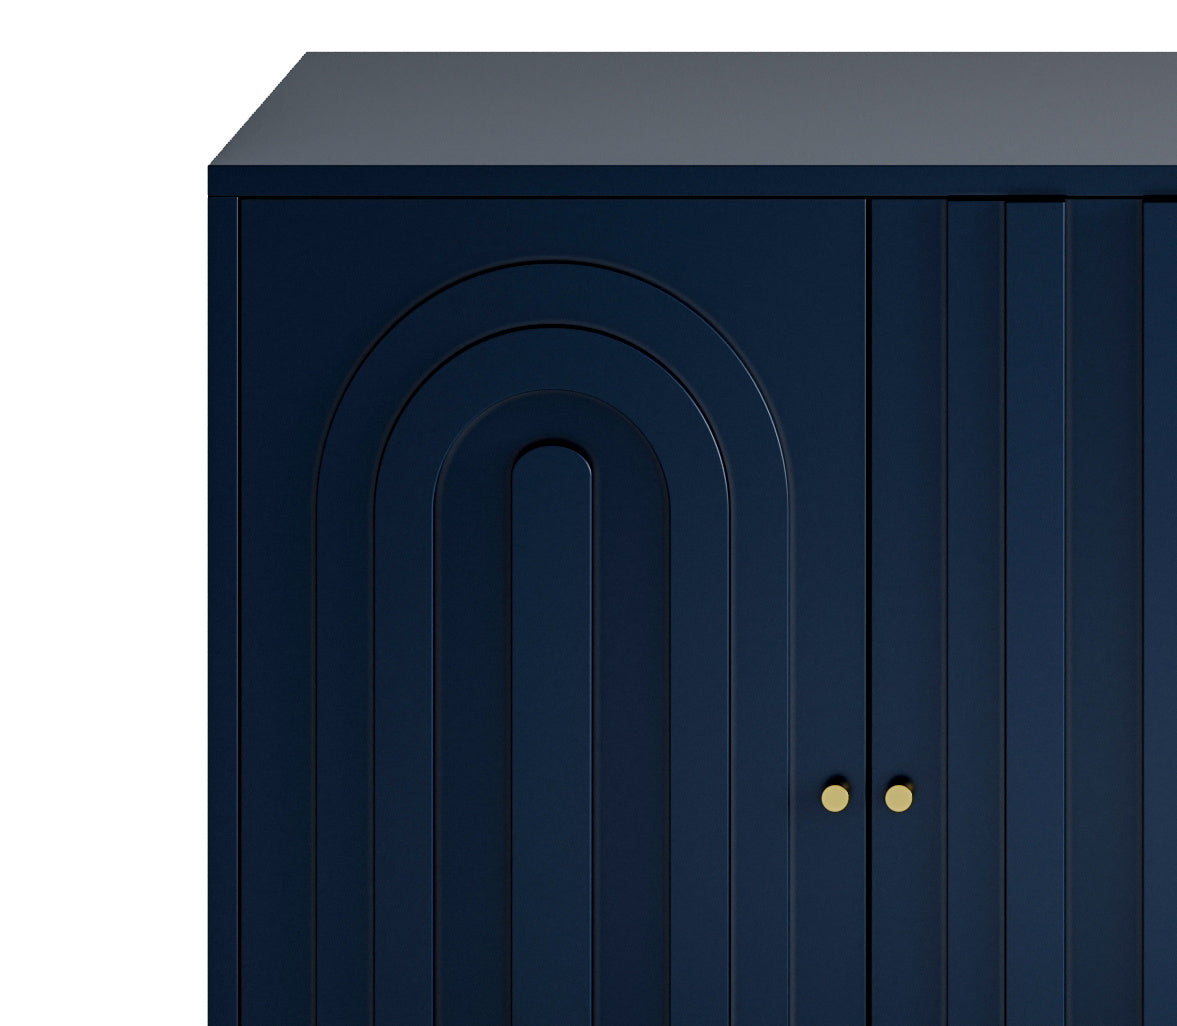 Chic Serenity: Contemporary Blue Lacquered 4-Door Wooden Cabinet - An Elegant Sideboard and Buffet Server for Multifaceted Use in the Living Room, Entryway, Office, Kitchen, and Dining Area.